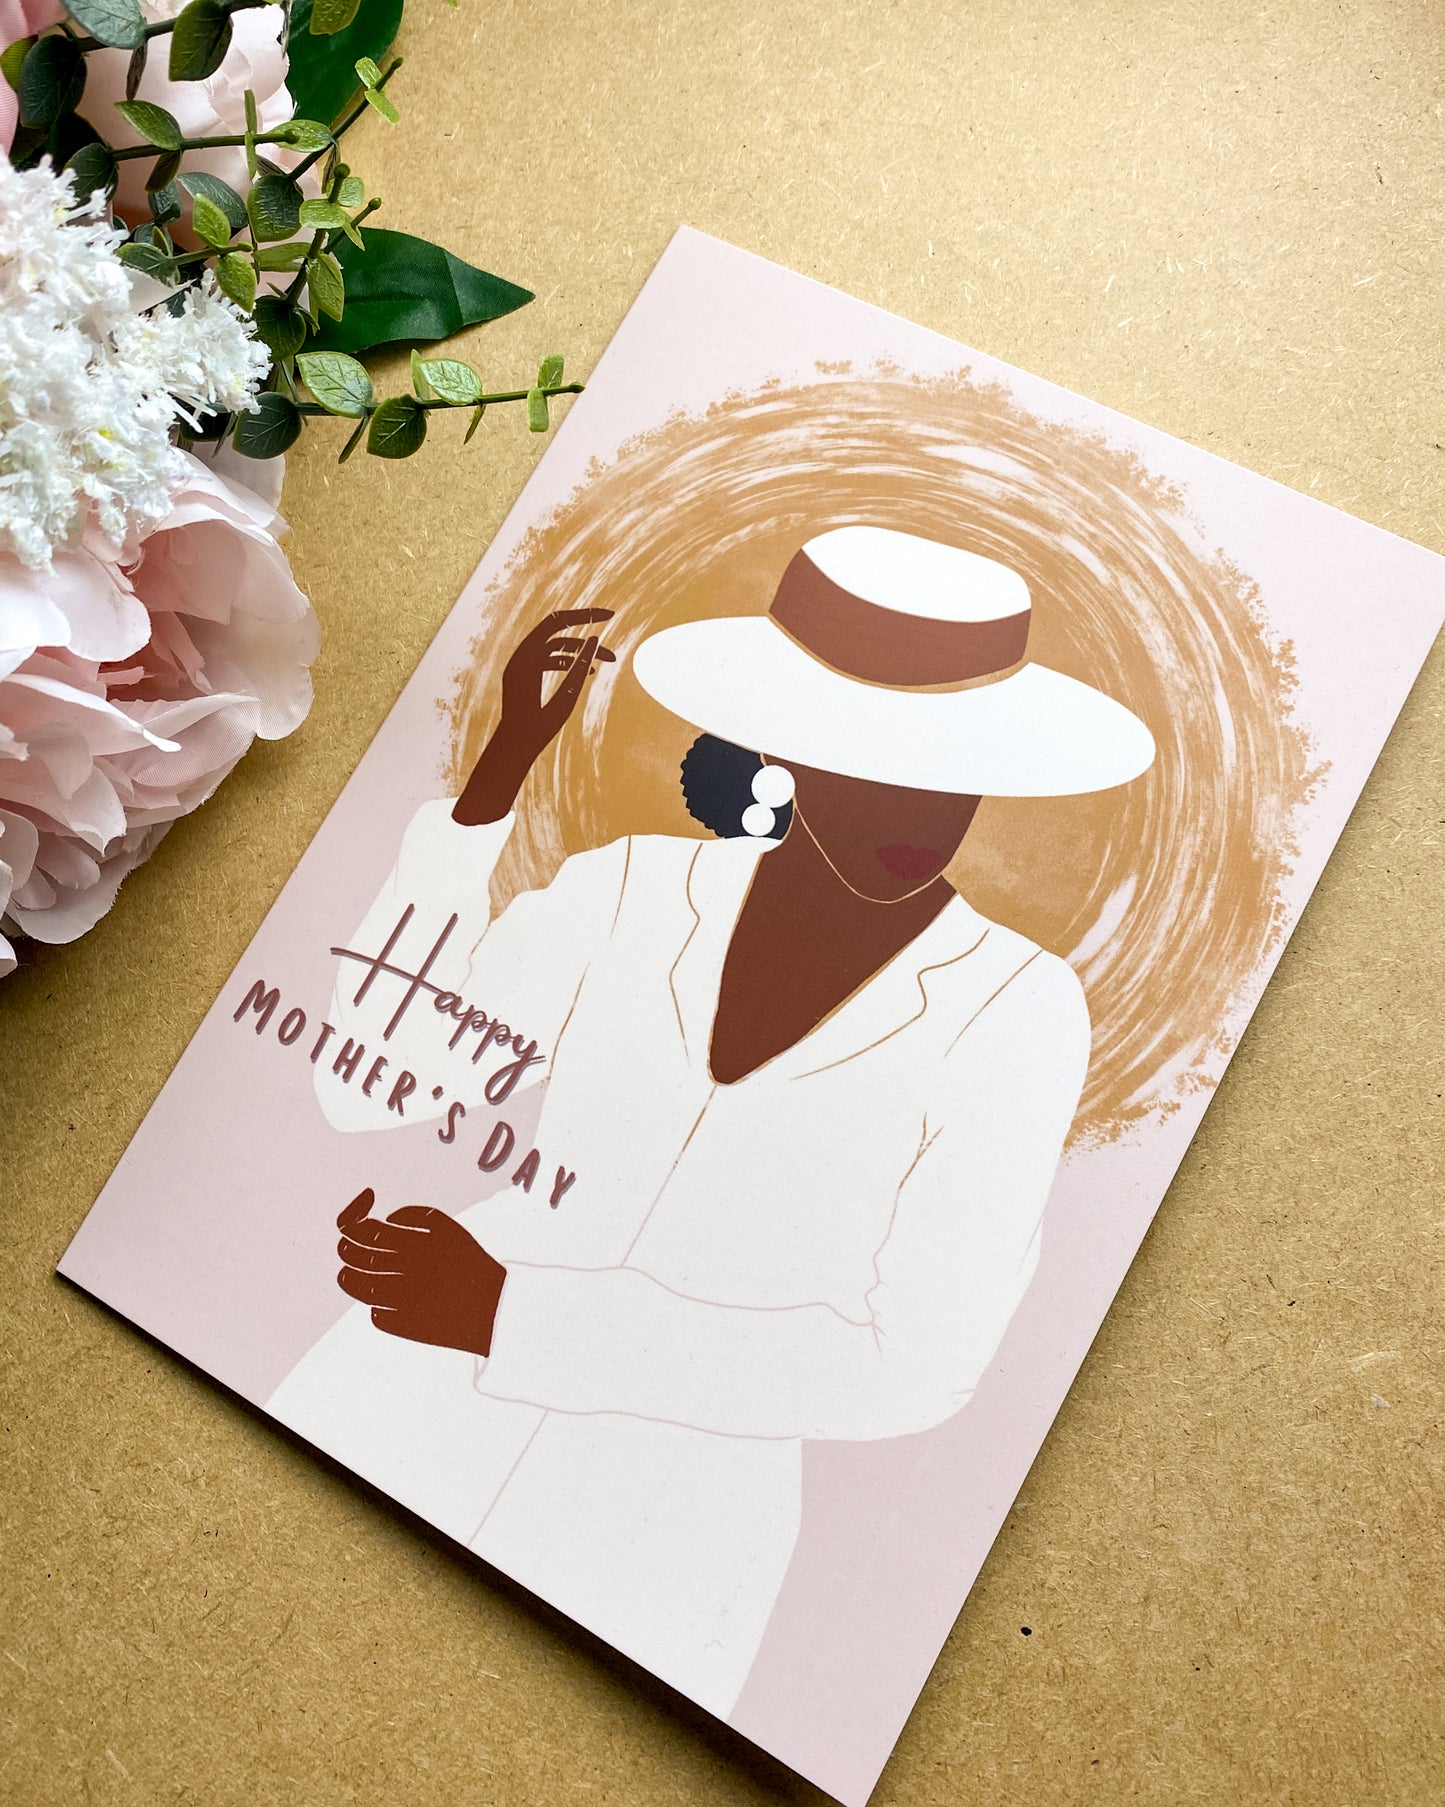 Sophisticated Happy Mothers Day Card - Black Queen - Mum